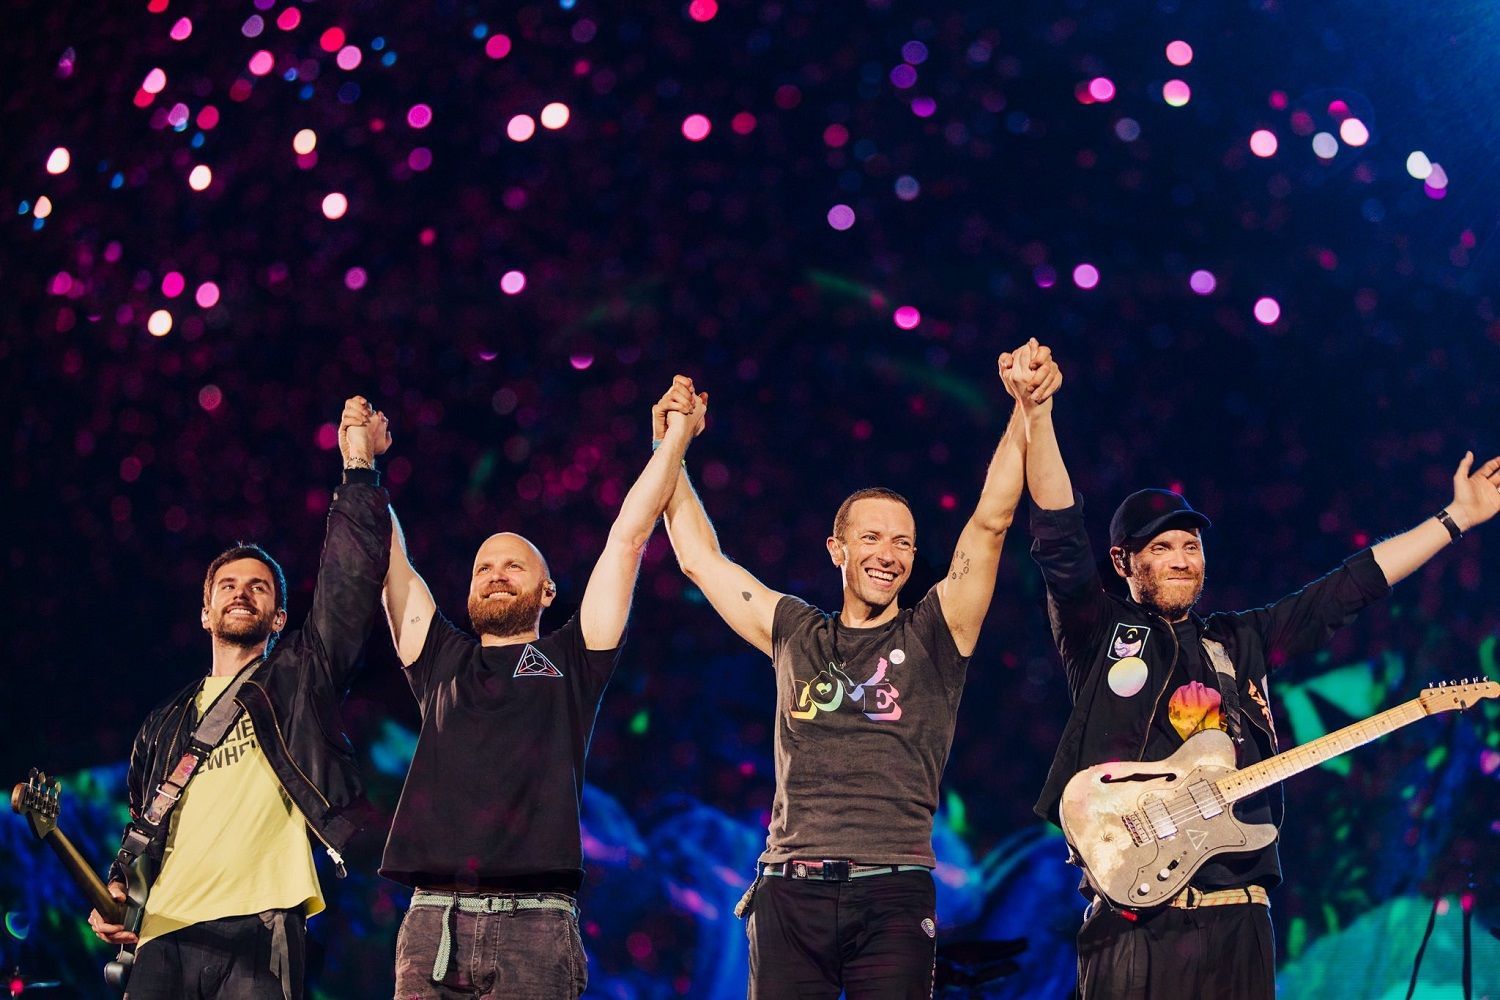 What Is Coldplay Singer Chris Martin's Net Worth Compared to His Bandmates?